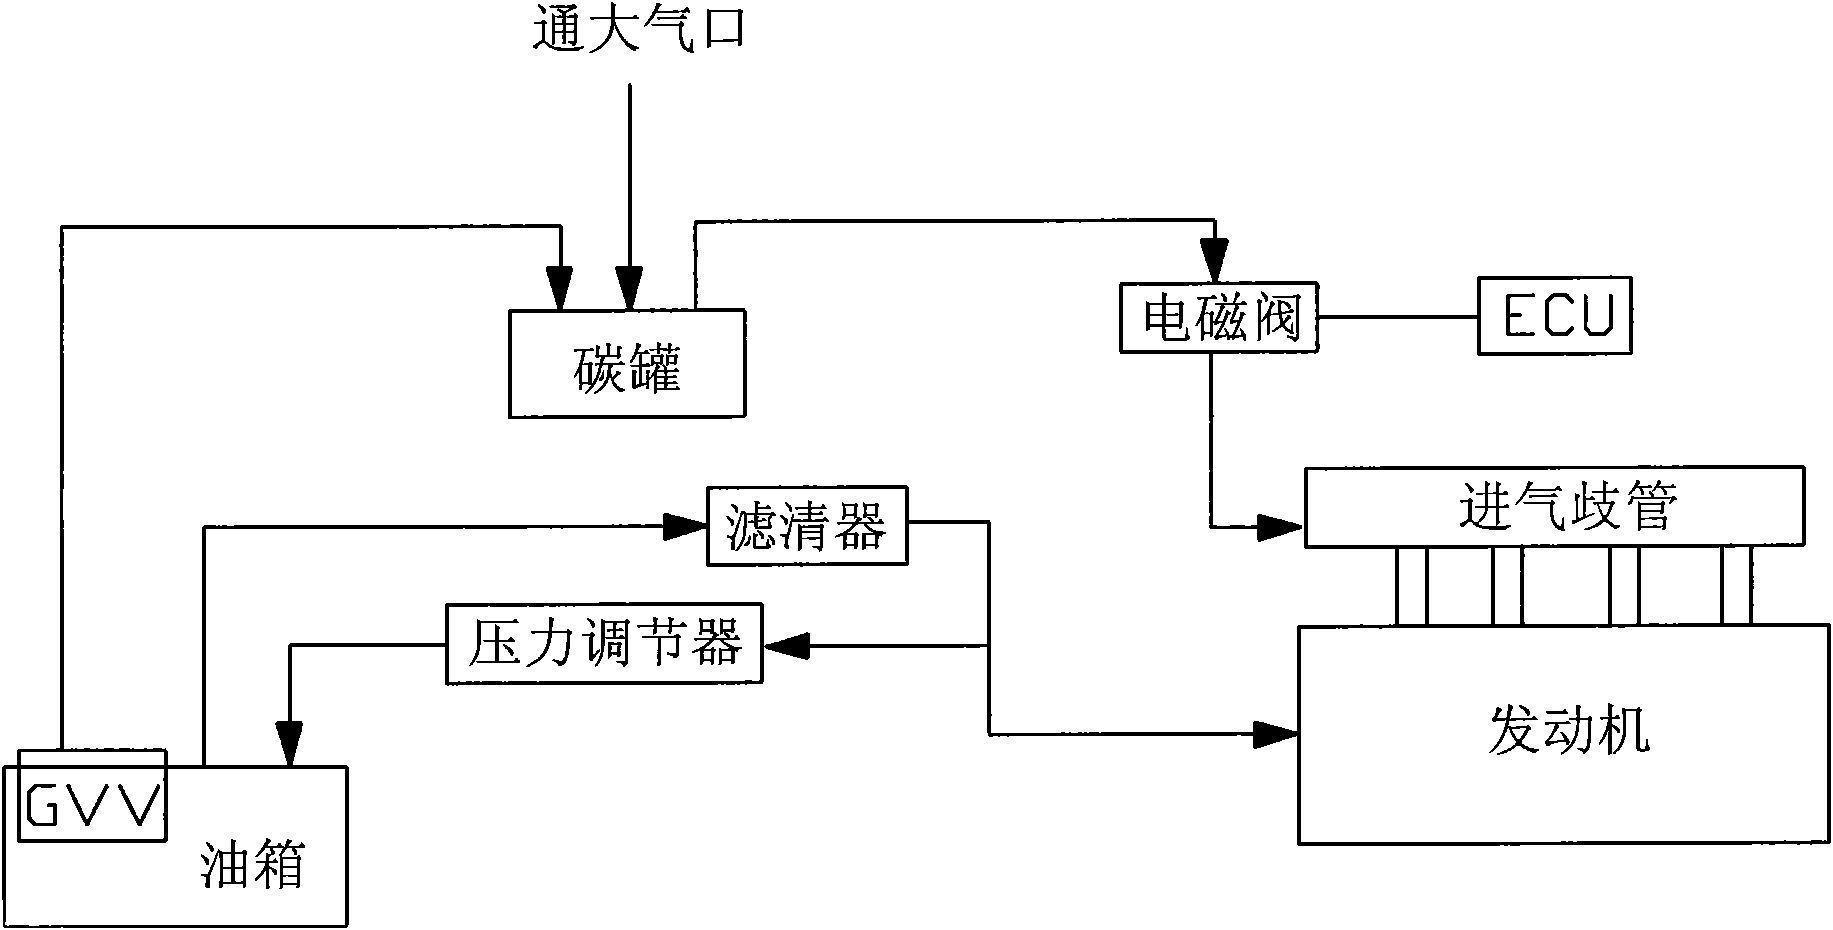 Fuel supply system of double-fuel automobile